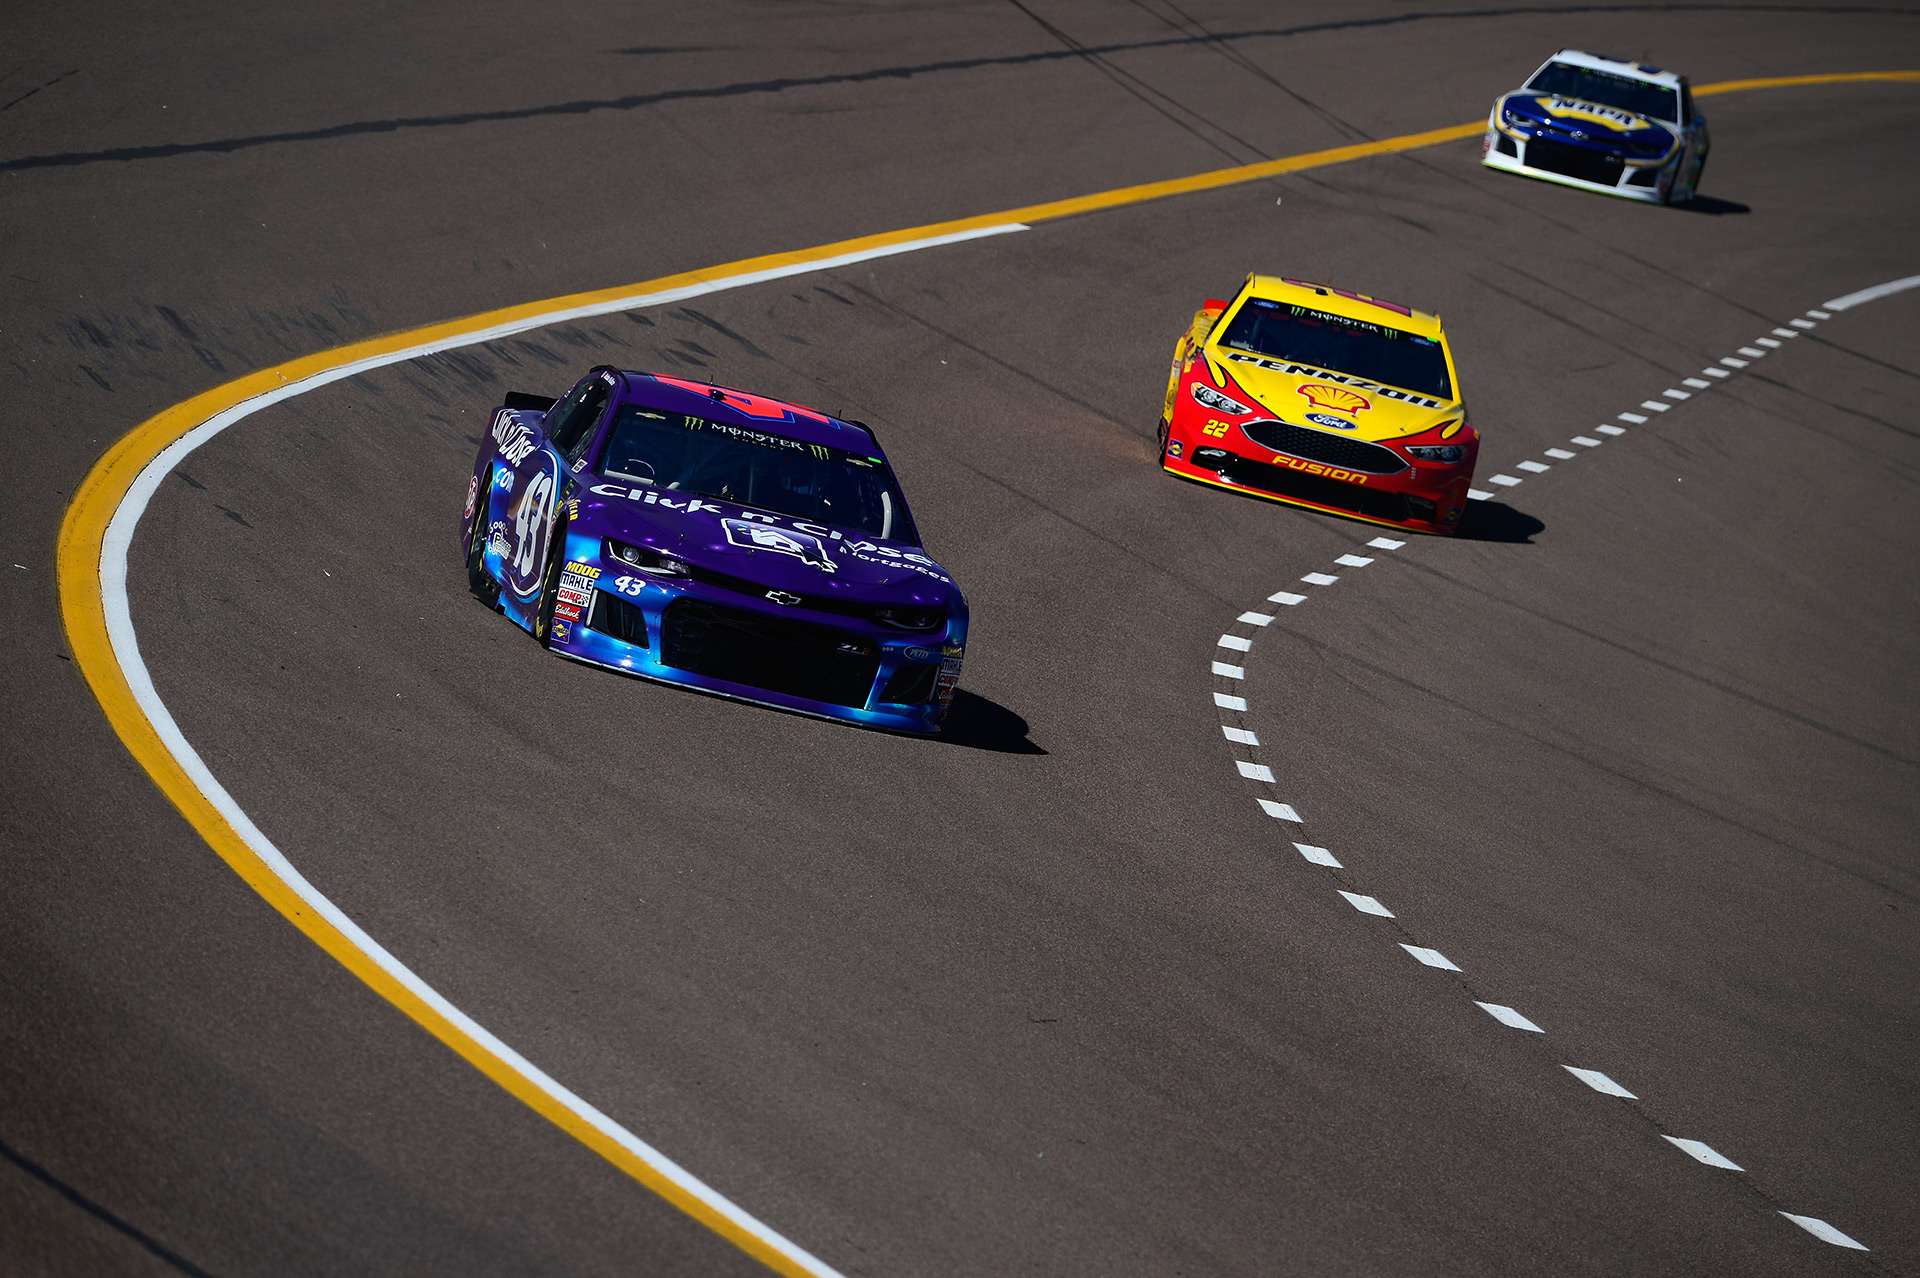 Preview: 2018 TicketGuardian 500 NASCAR Race at Phoenix - The Drive